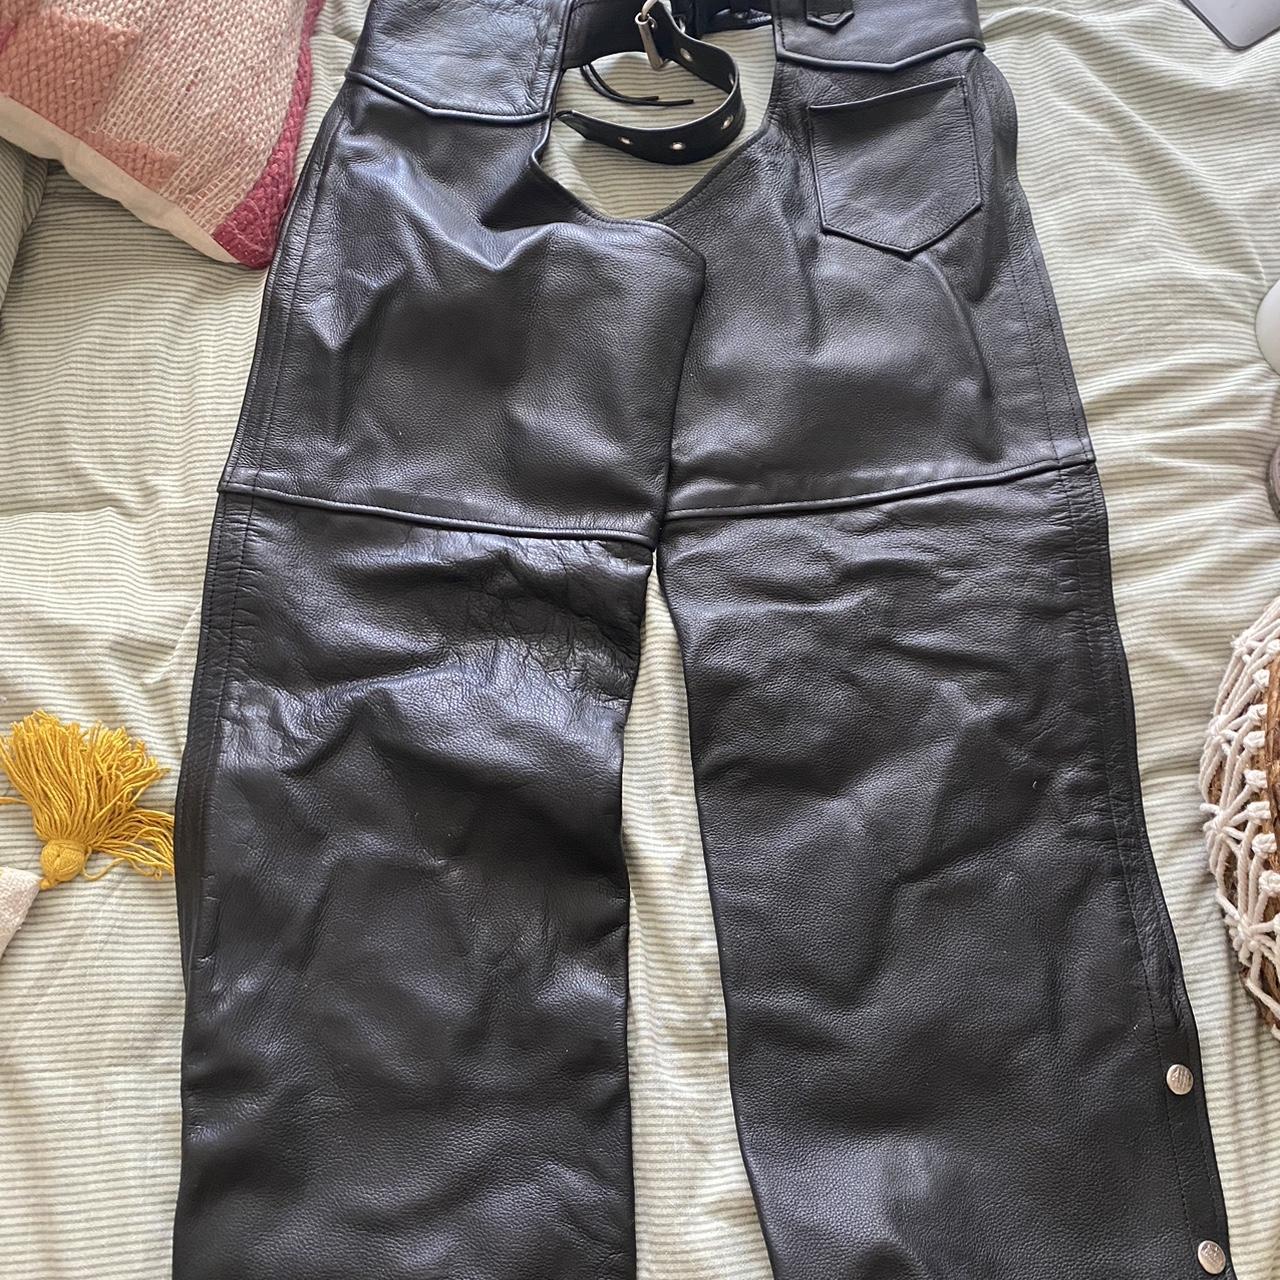 Interstate Leather Chaps - Depop